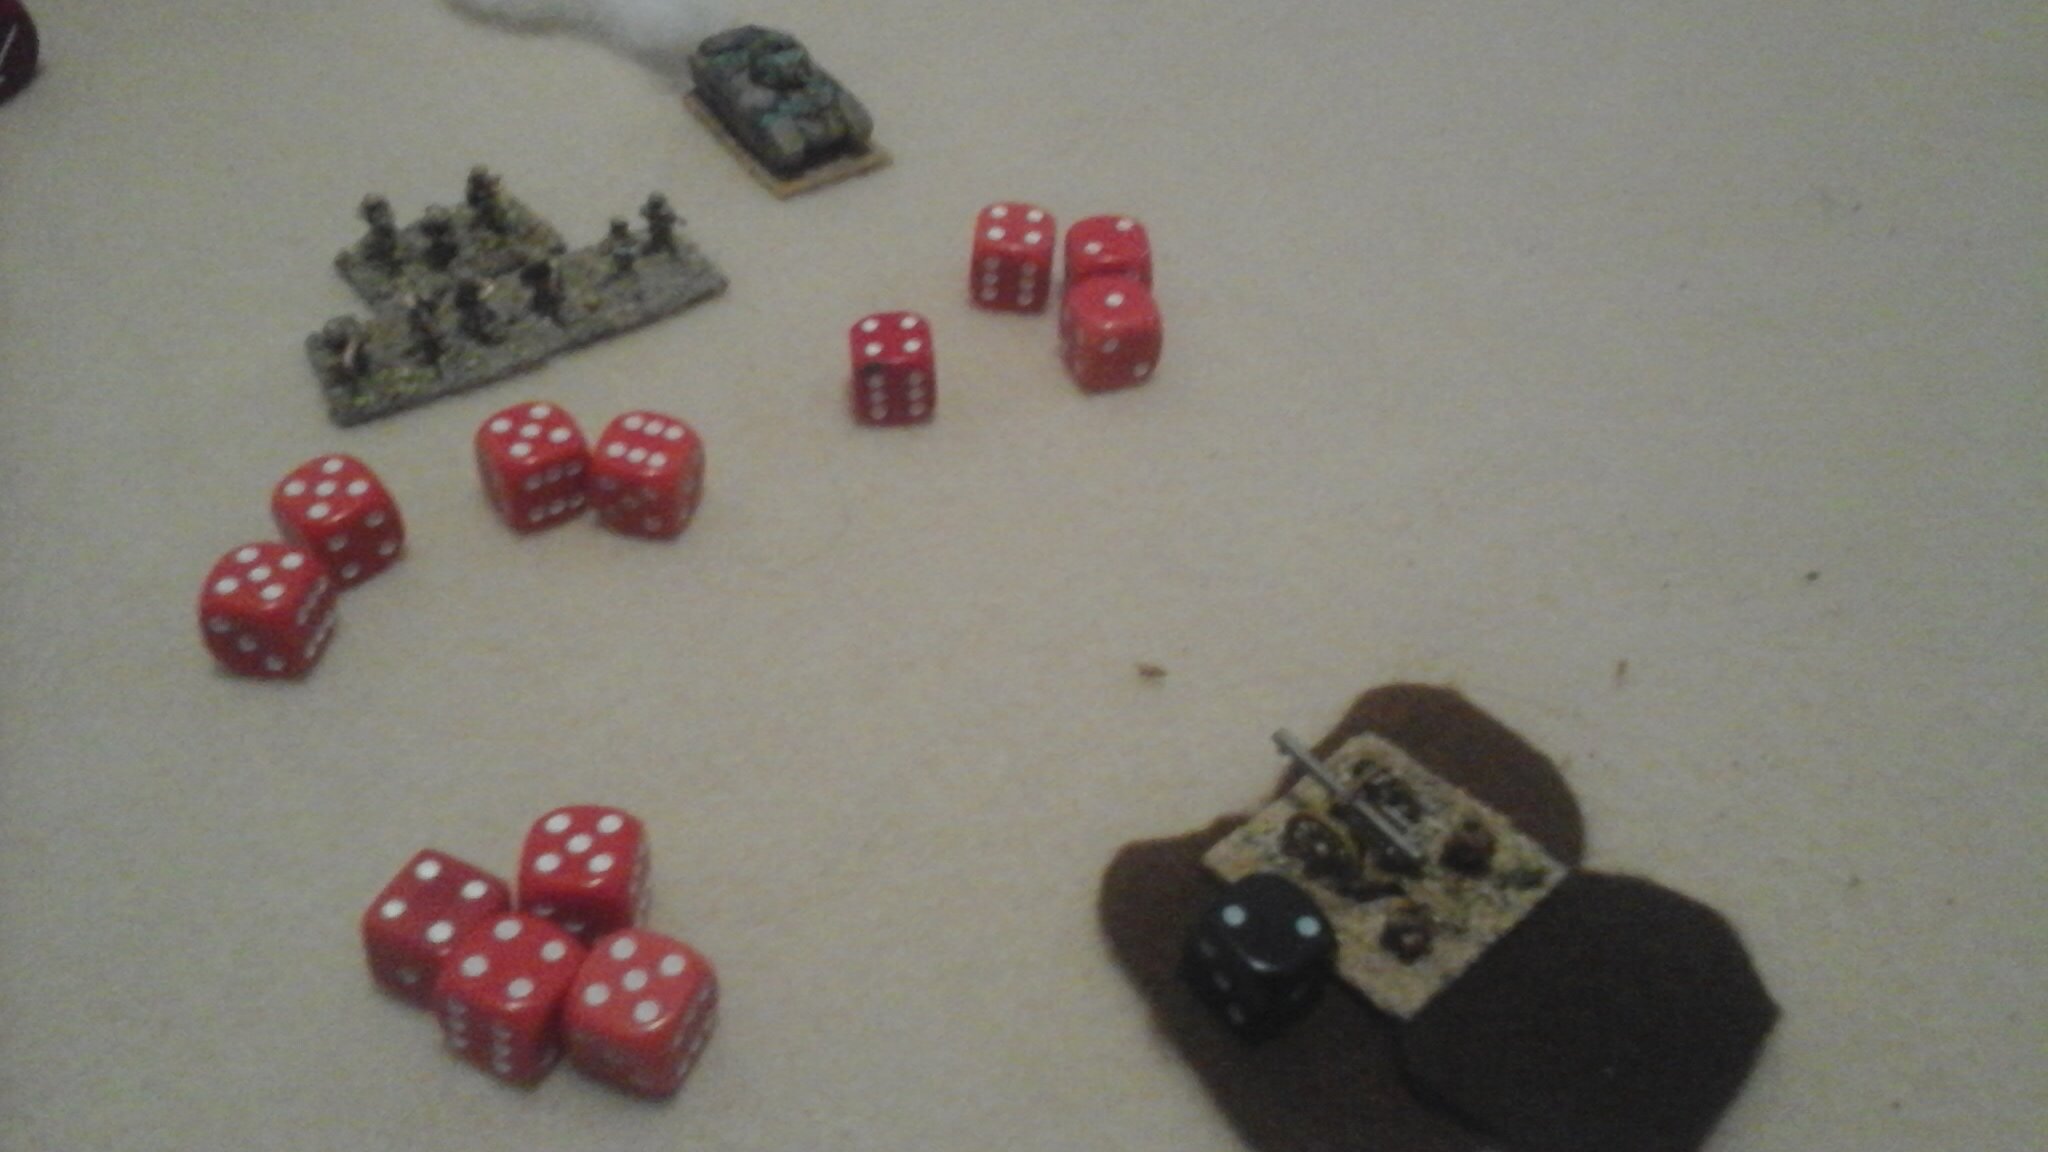 The Aussies come out from behind the right flank tank and strafe the Italian gun position.